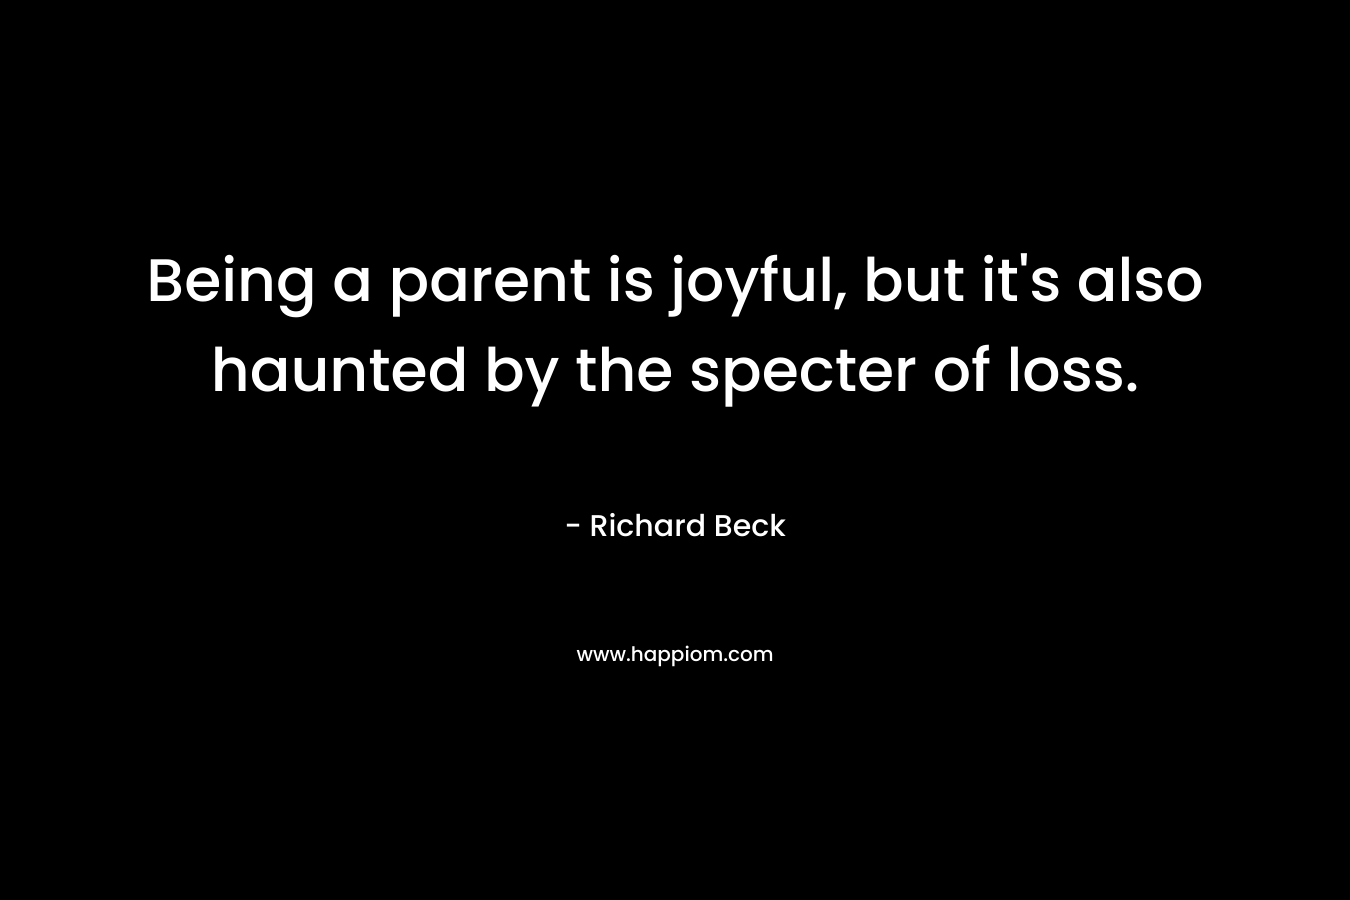 Being a parent is joyful, but it's also haunted by the specter of loss.